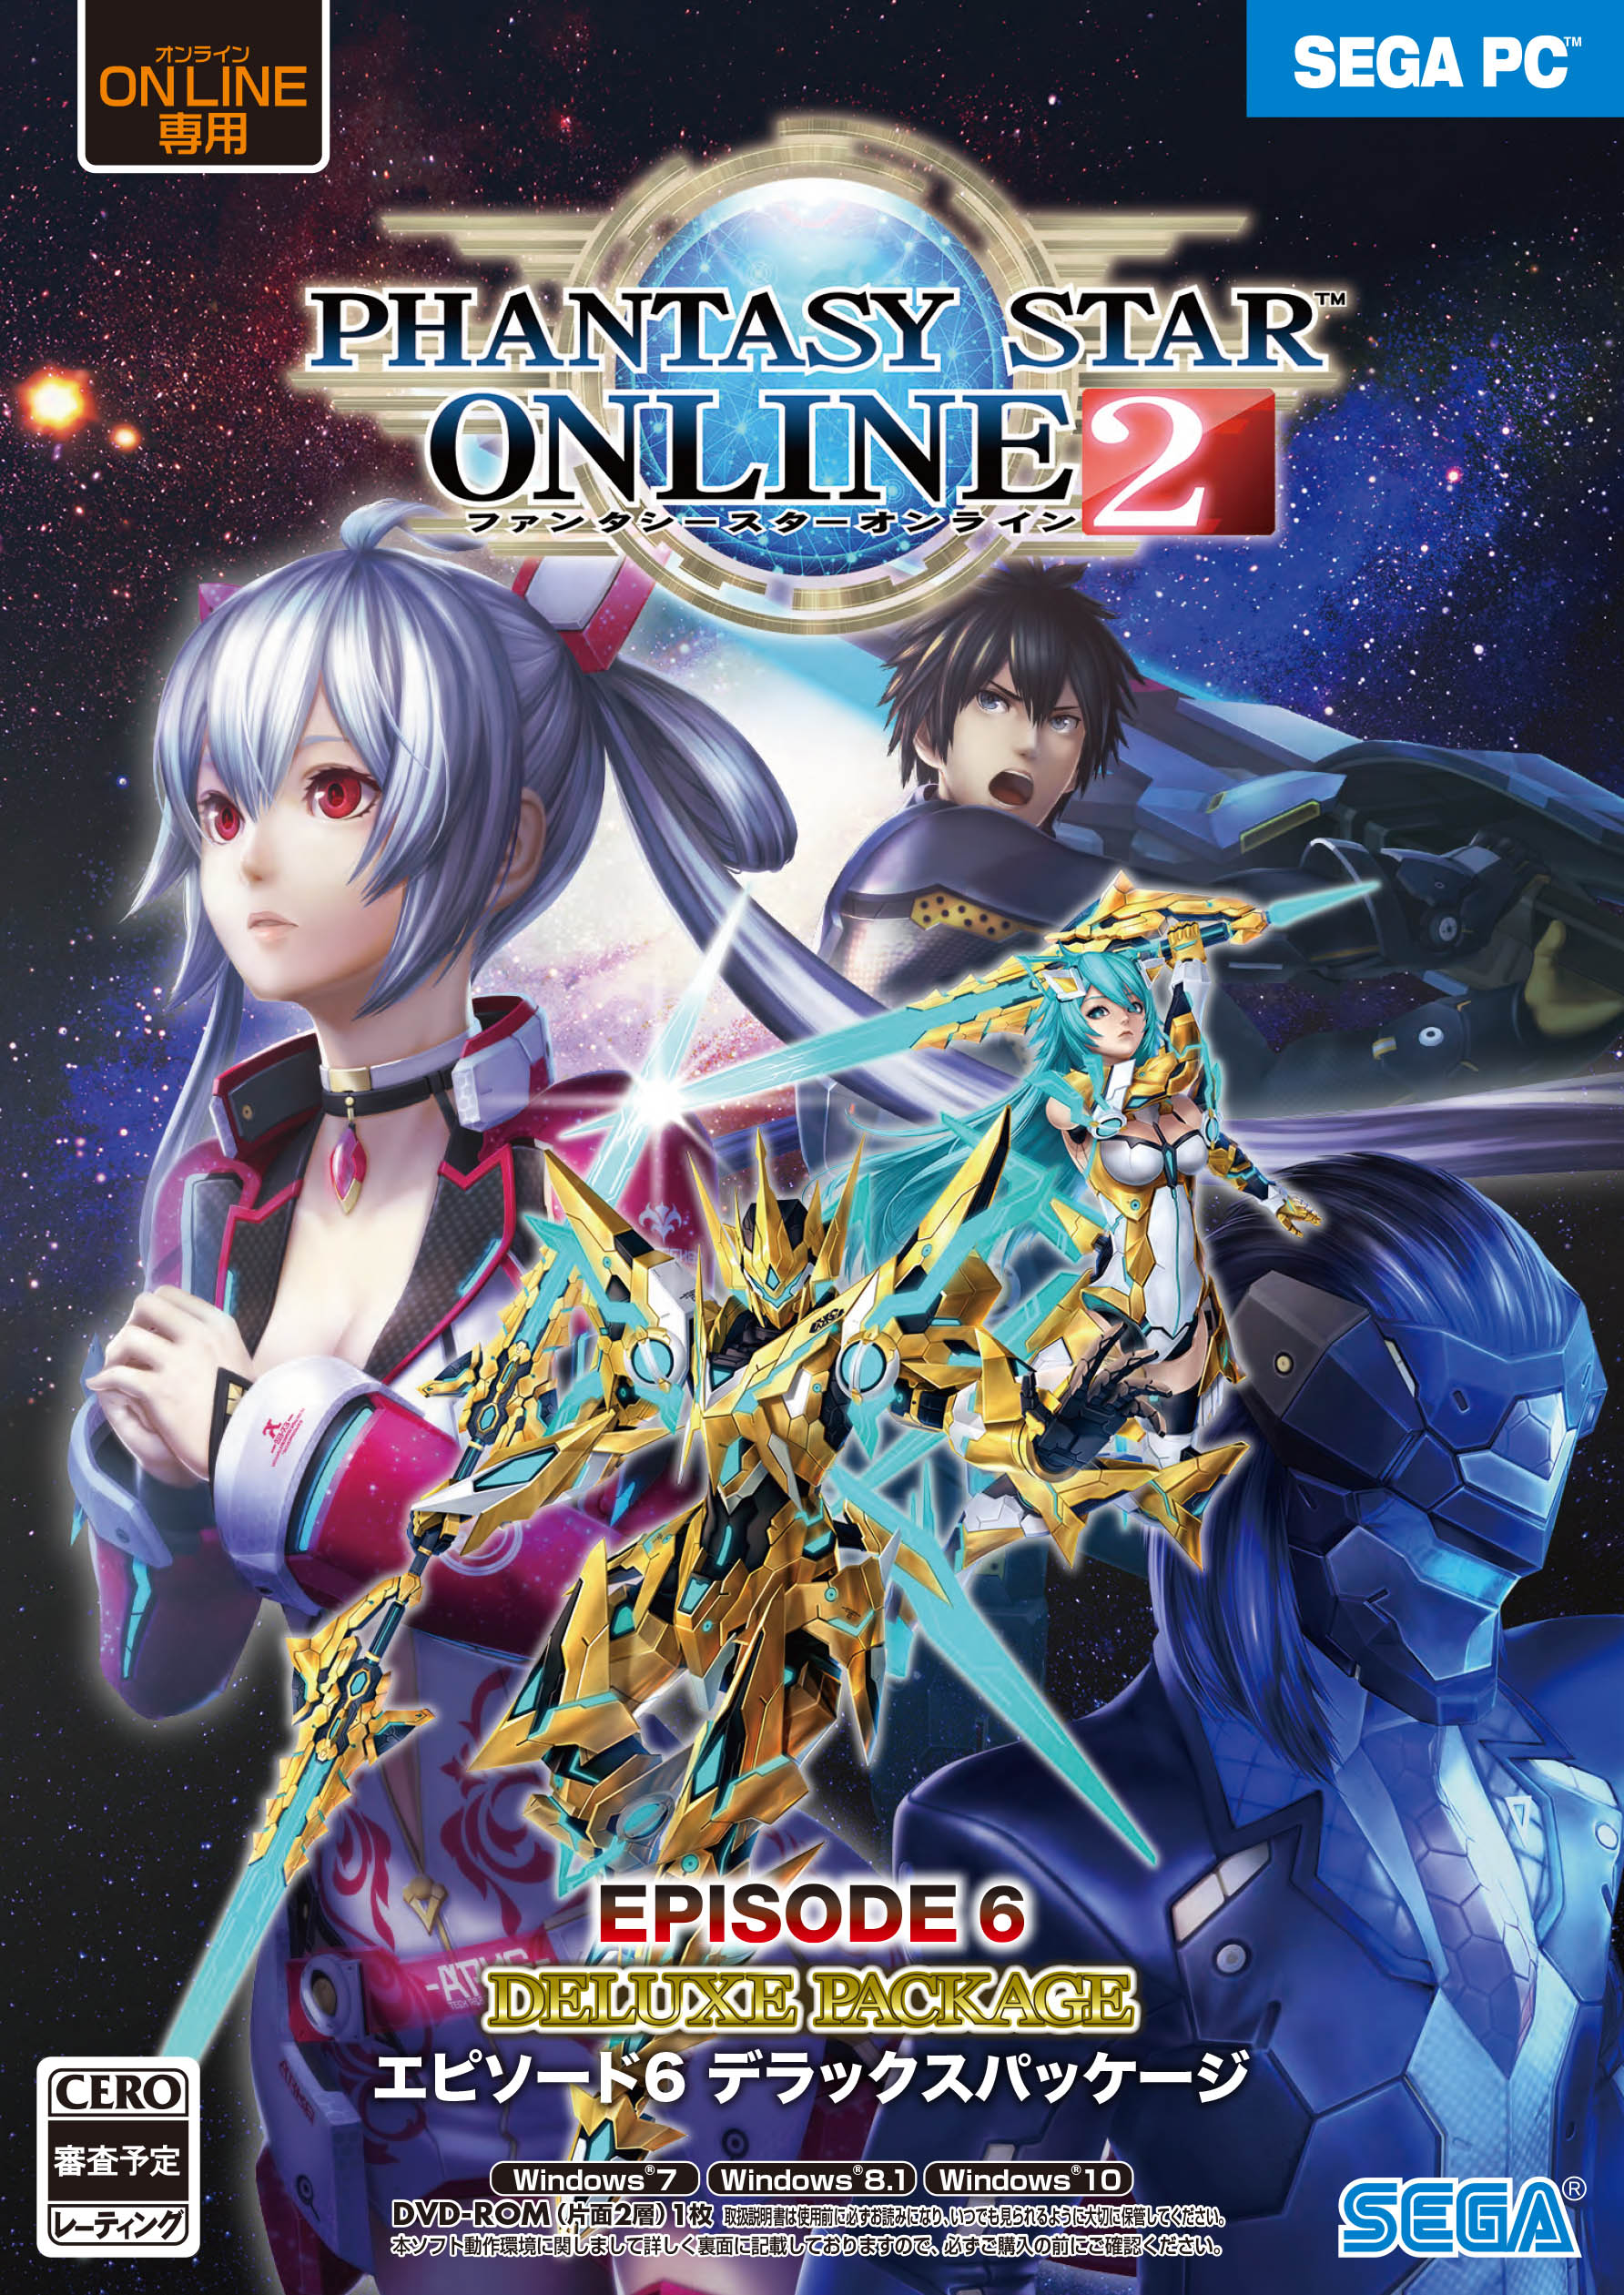 Phantasy Star Online 2: Episode 6 Deluxe Package for PS4, Switch, and